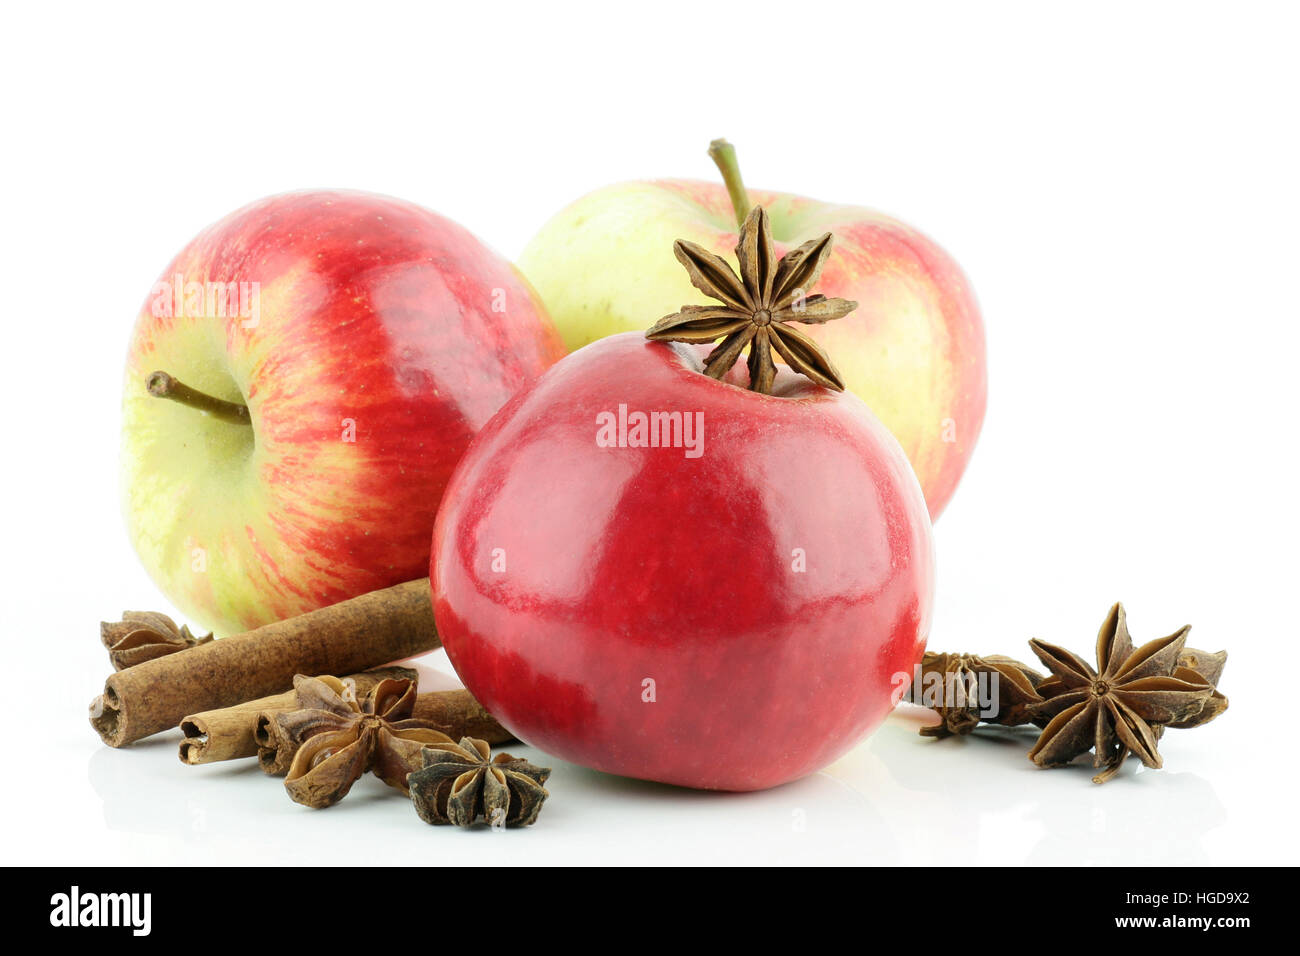 Three red Elstar apples (Malus domestica) with cinnamon and star anise, on a white background Stock Photo - Alamy